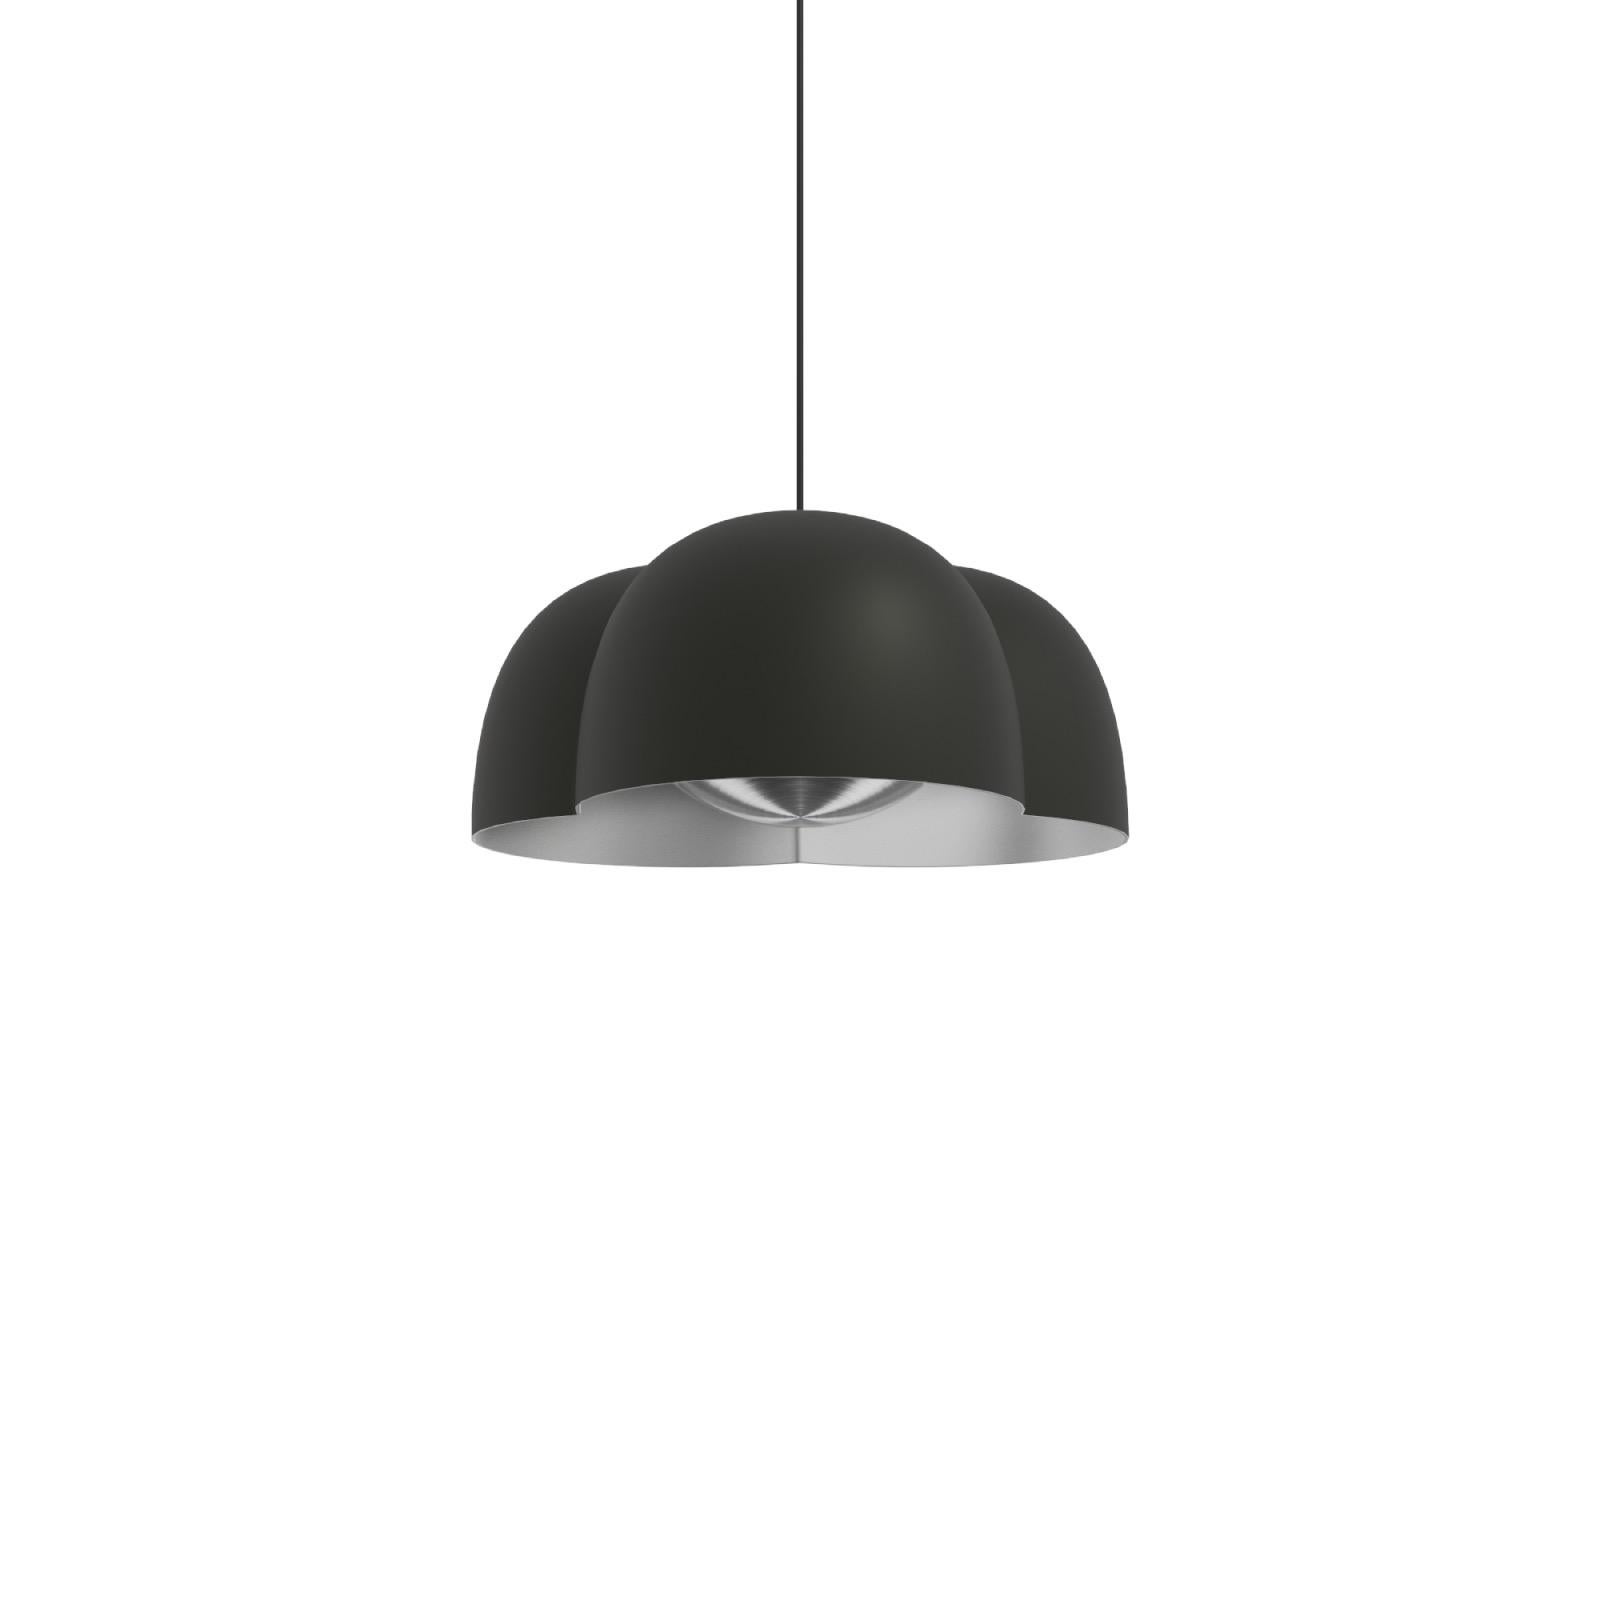 Aluminum Contemporary Pendant Lamp 'Cotton' by ago, Large - Deep Green For Sale